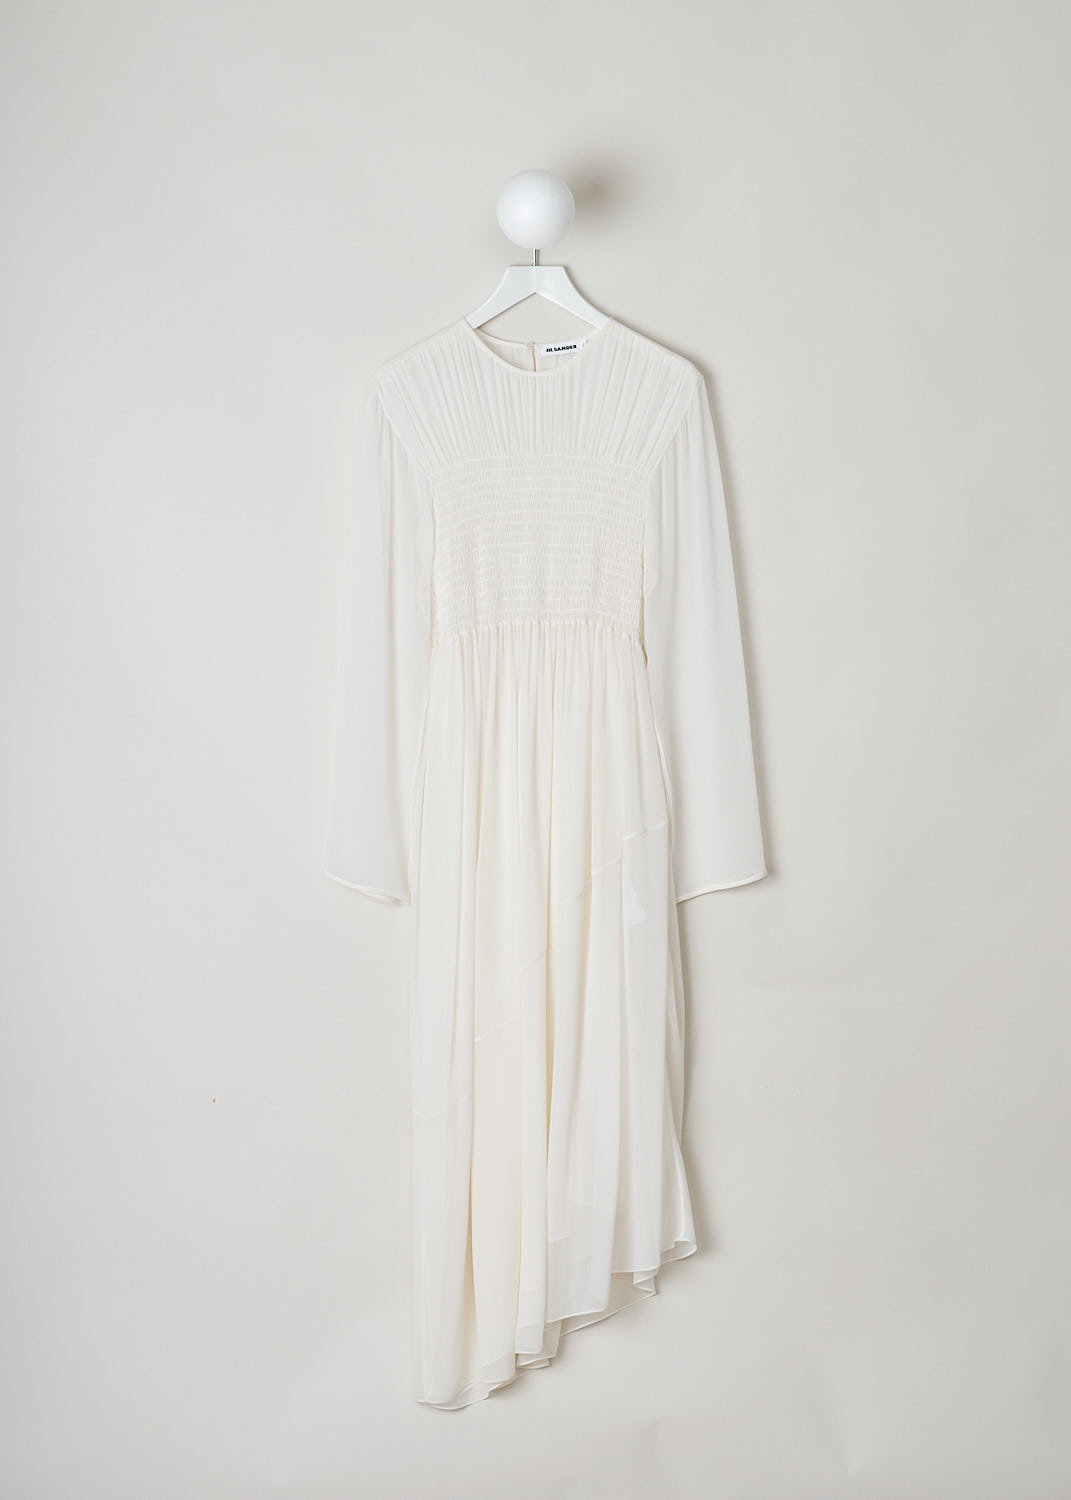 JIL SANDER, WHITE DRESS WITH SHIRRED BODICE, White, Front, This white long sleeve dress has pleats across the chest and a shirred bodice. The dress is made in a semi sheer fabric.  The skirt flows out from small crystal pleats. The hemline has an asymmetric finish, meaning that from left to right one side is longer than the other. A single button can be found in the back of the neck.
